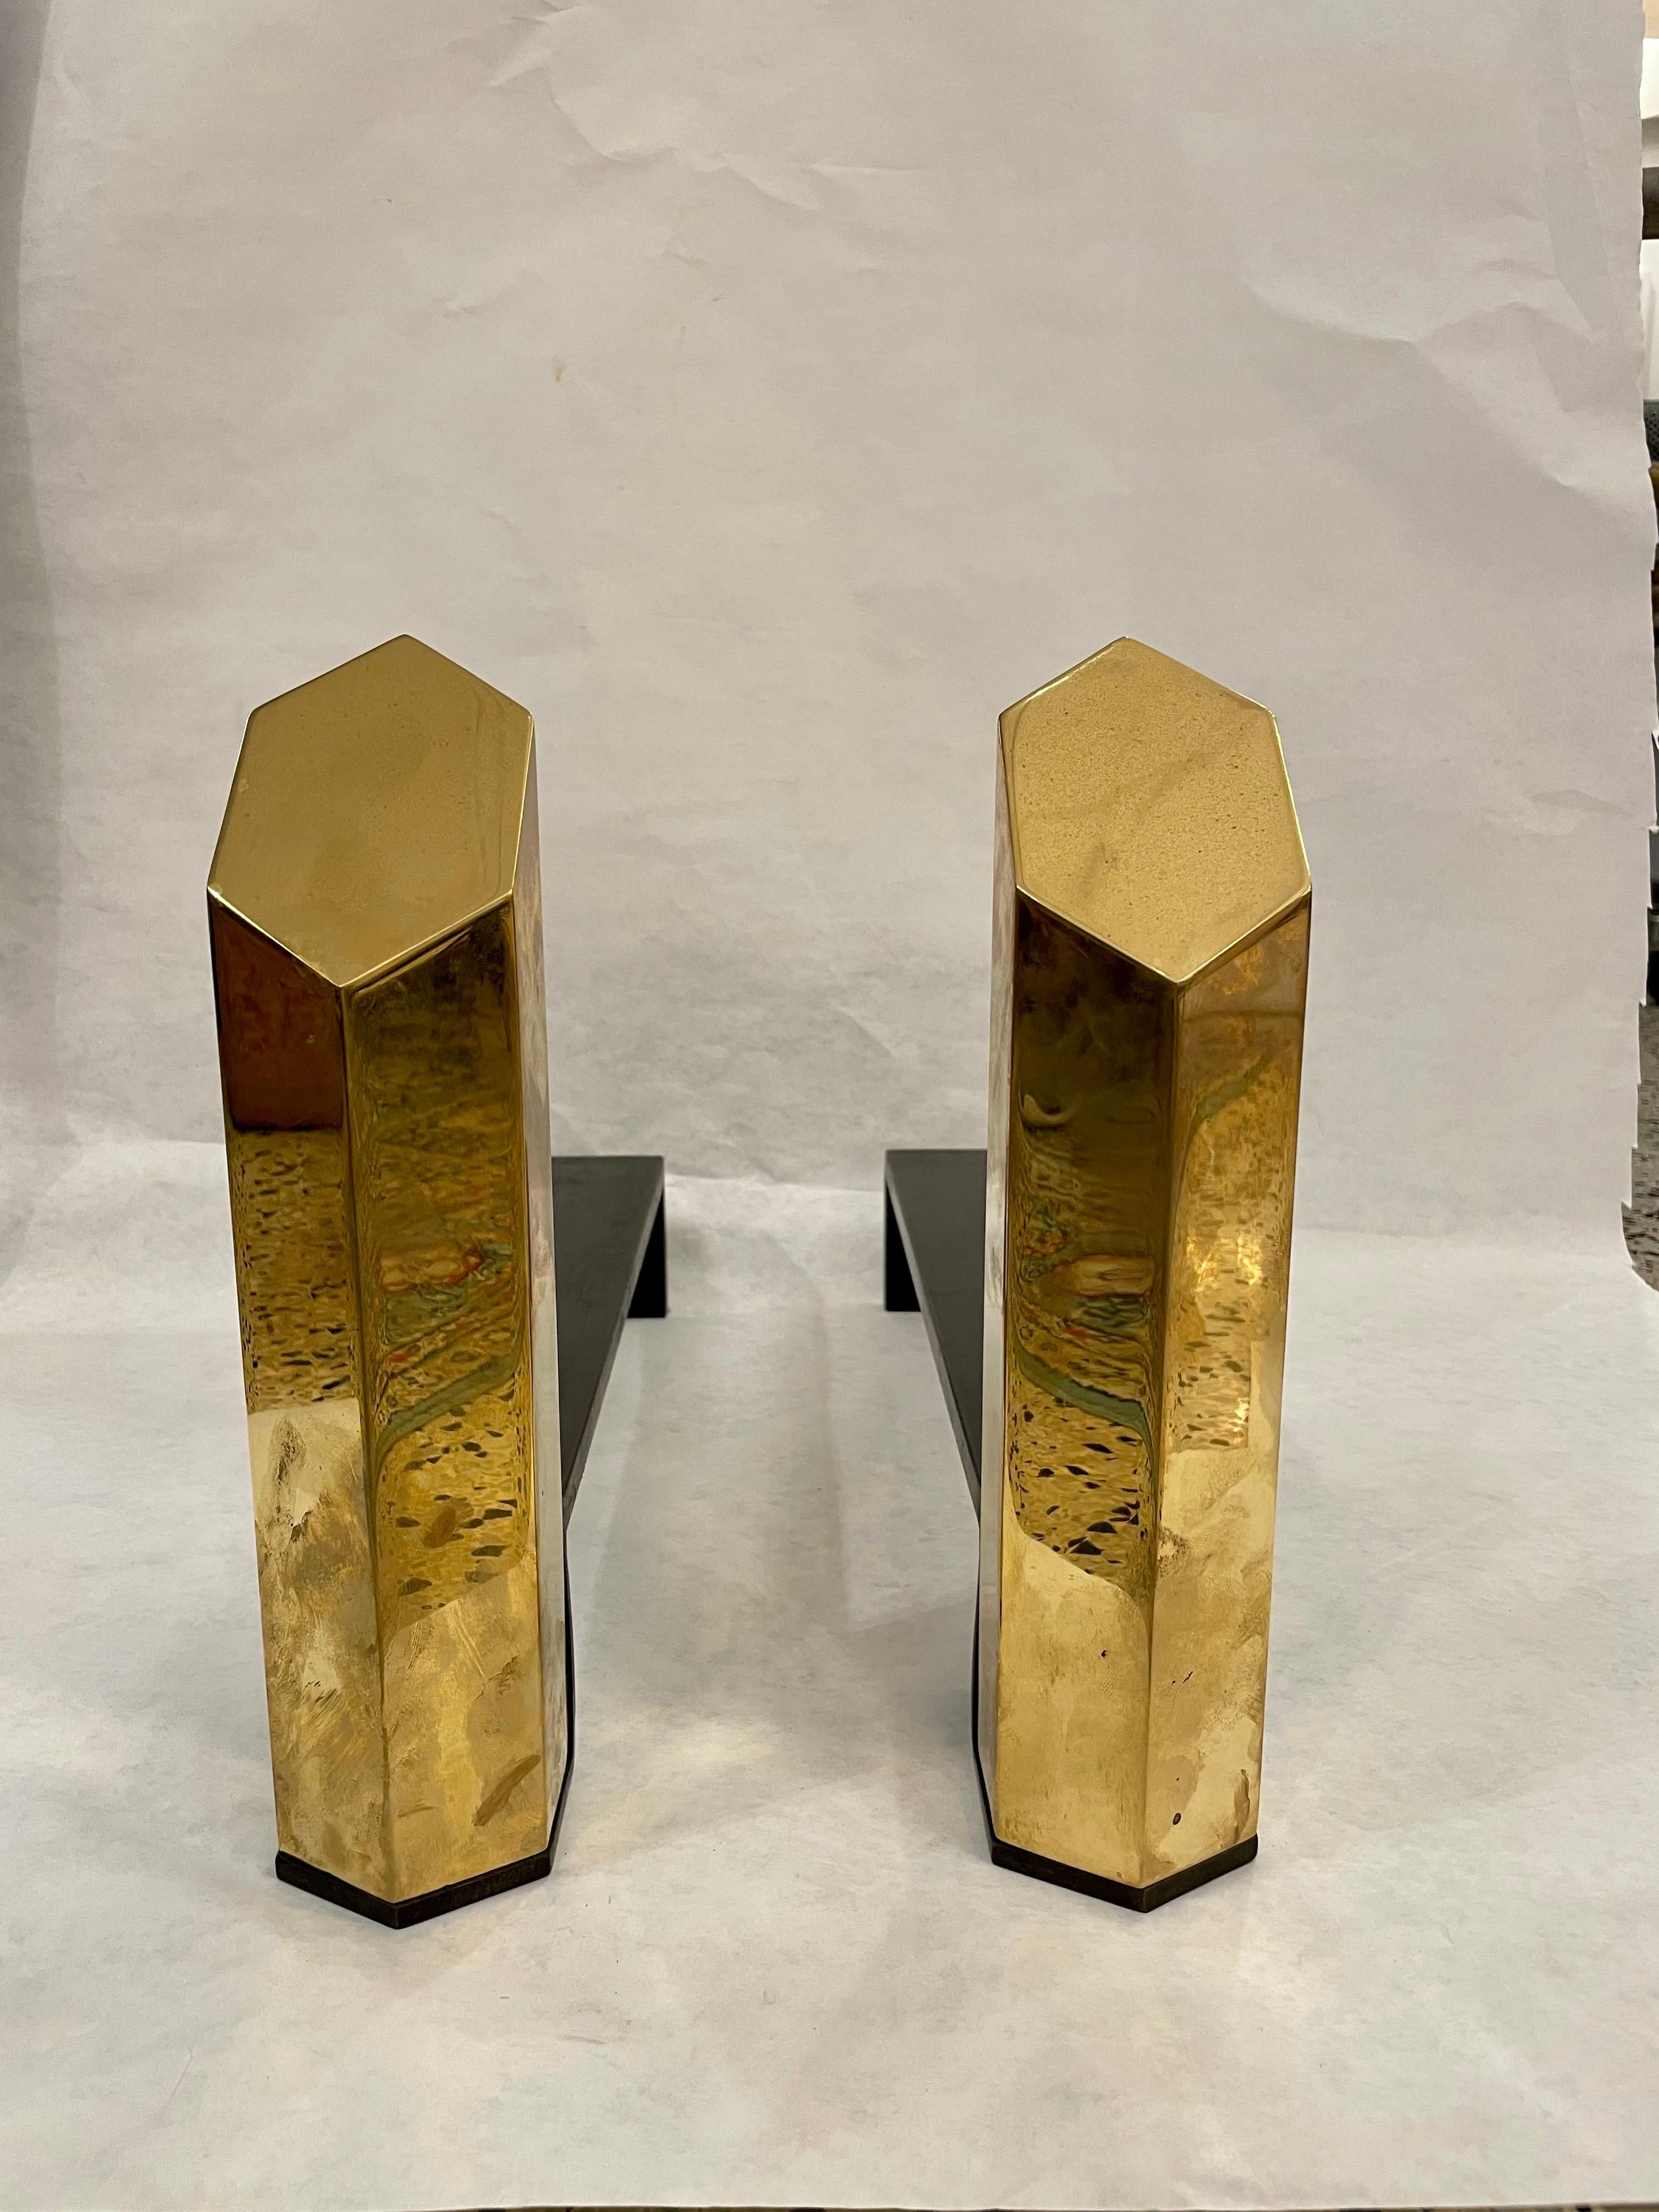 Breathtaking - sculptural yet simple, these are heavy architectural design solid brass andirons are hexagonal cut on angle to augment the beauty of the brass and play on geometrical shapes.

Hexagonal brass column is 2.5